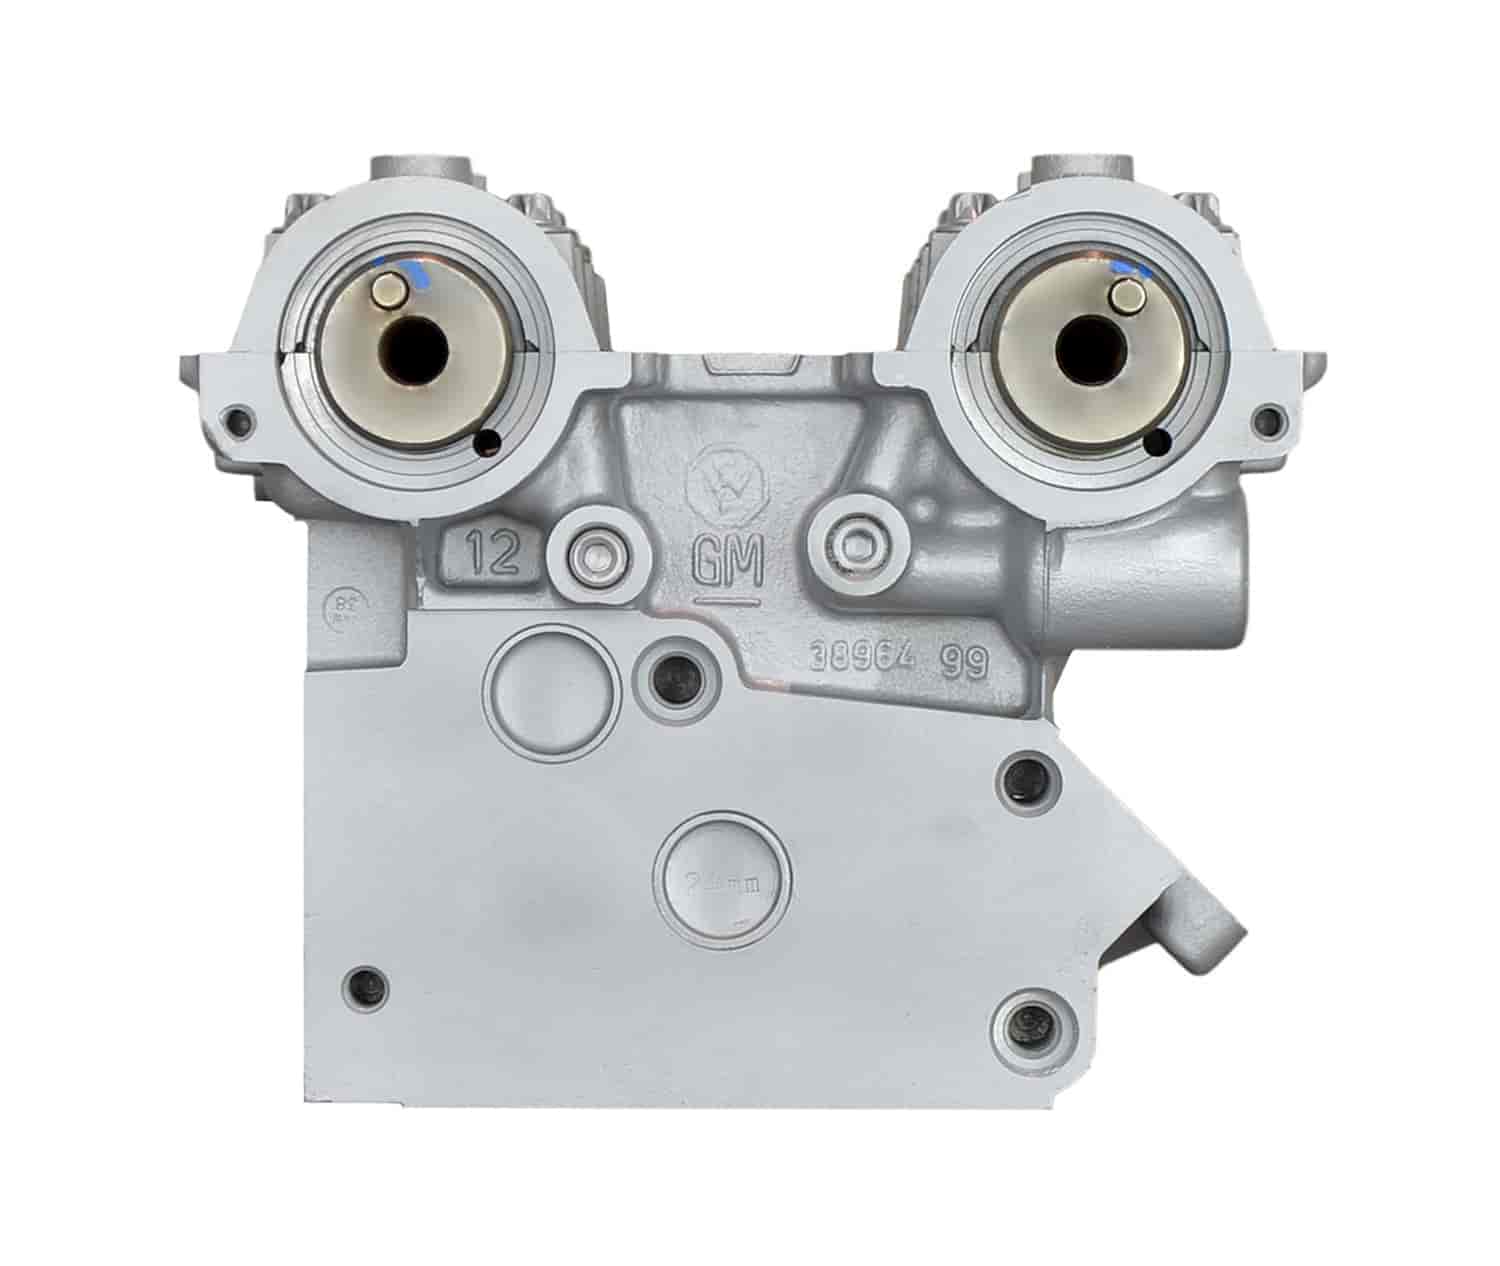 Remanufactured Cylinder Head for 2003-2004 Cadillac CTS with 3.2L V6